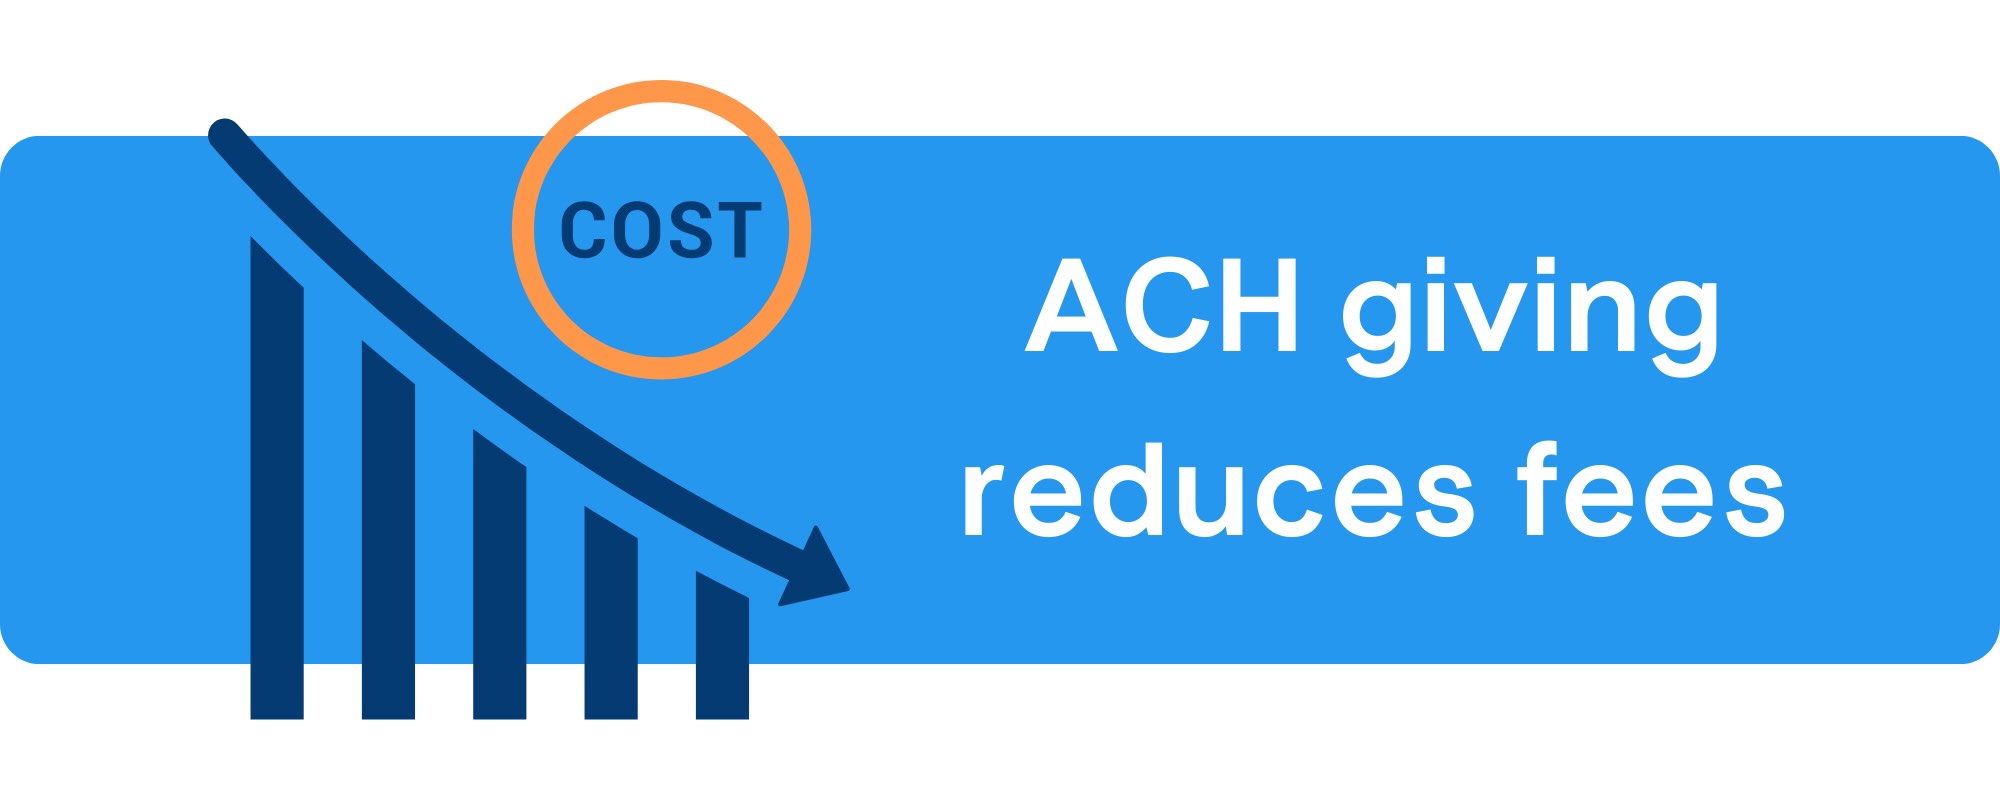 Online giving fees are lower with ACH donations